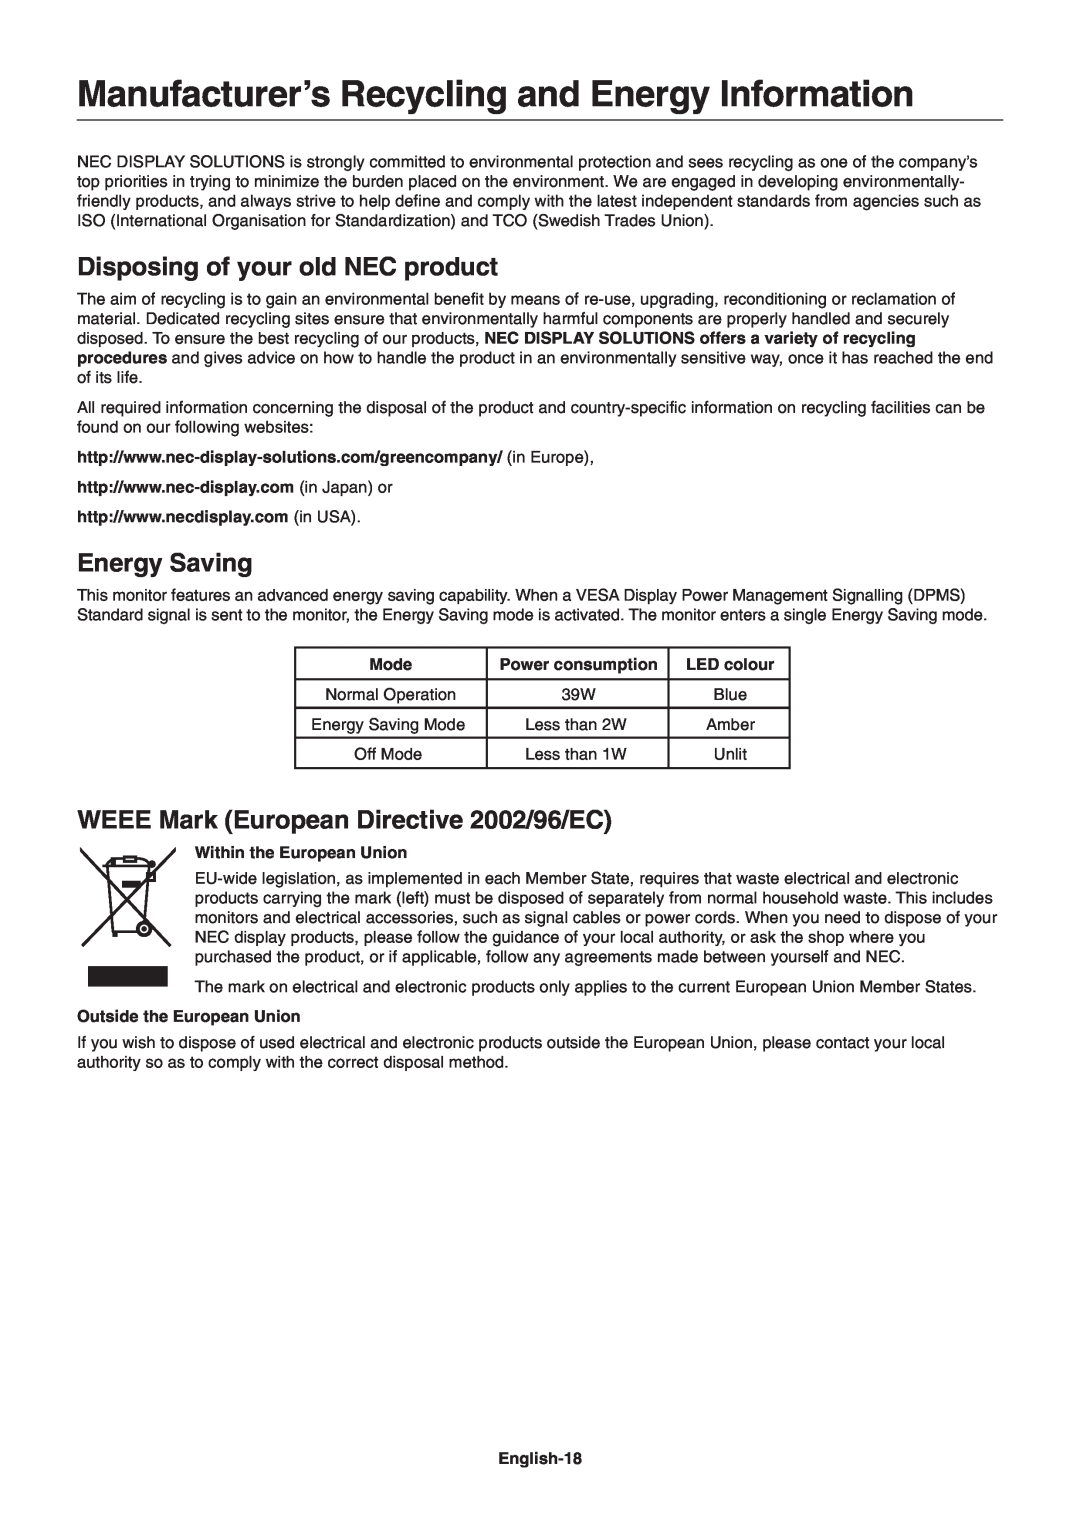 NEC EA191M-BK Manufacturer’s Recycling and Energy Information, Disposing of your old NEC product, Energy Saving, Mode 